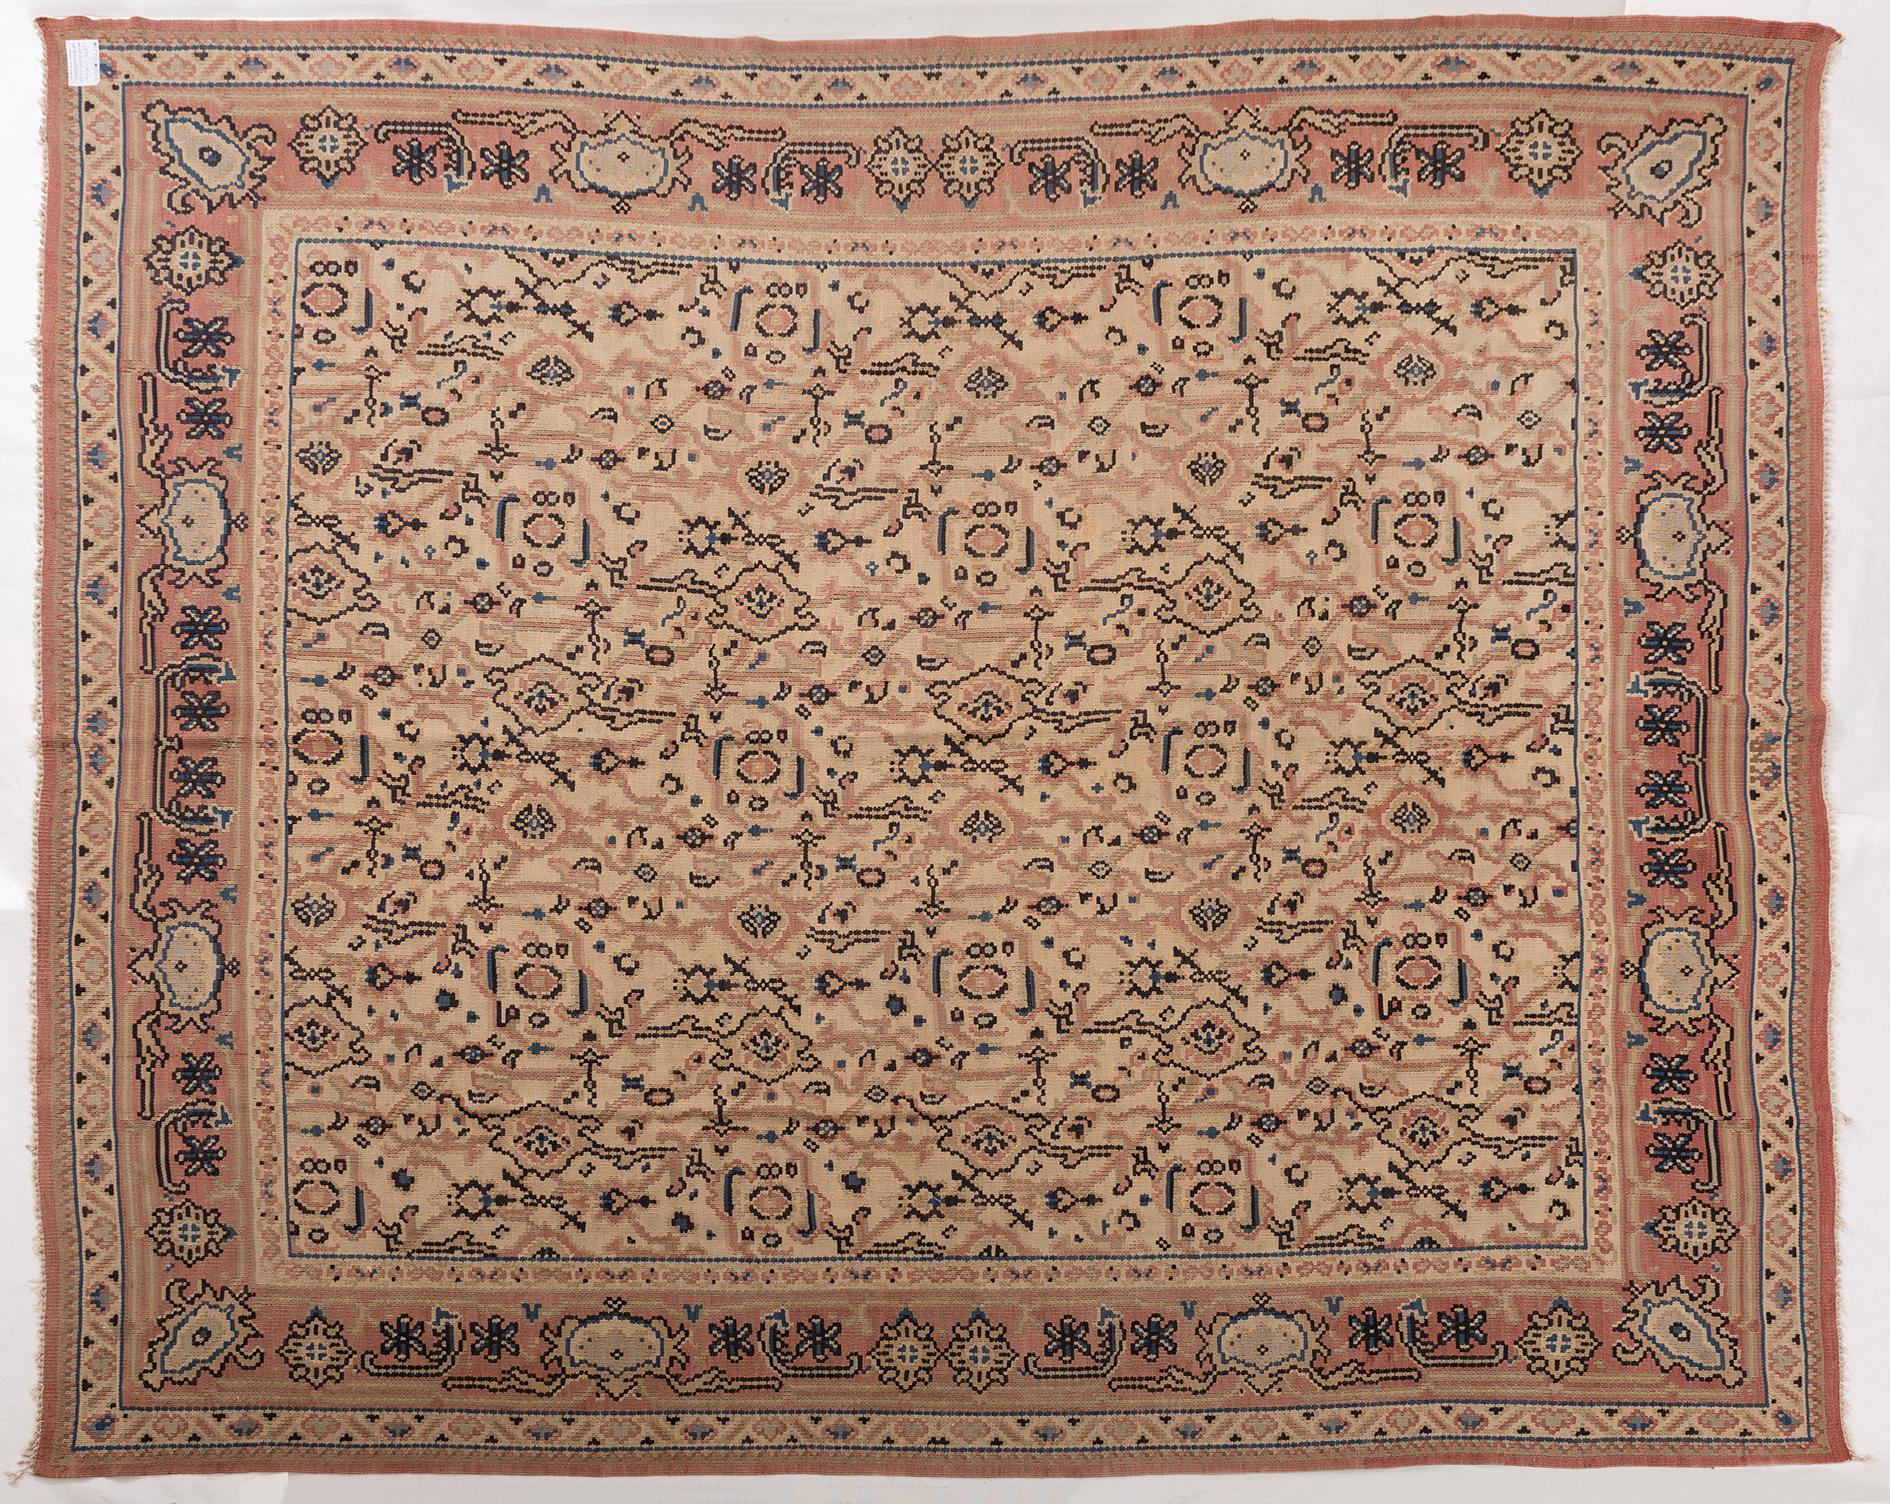 nr. 575 -  Discreet pale rose color for this elegant Bessarabia vintage kilim with nice measures, suited for a sitting or a sleeping room.
Interesting also without the usual central medallion. 
Interesting  final price for closing activities, even